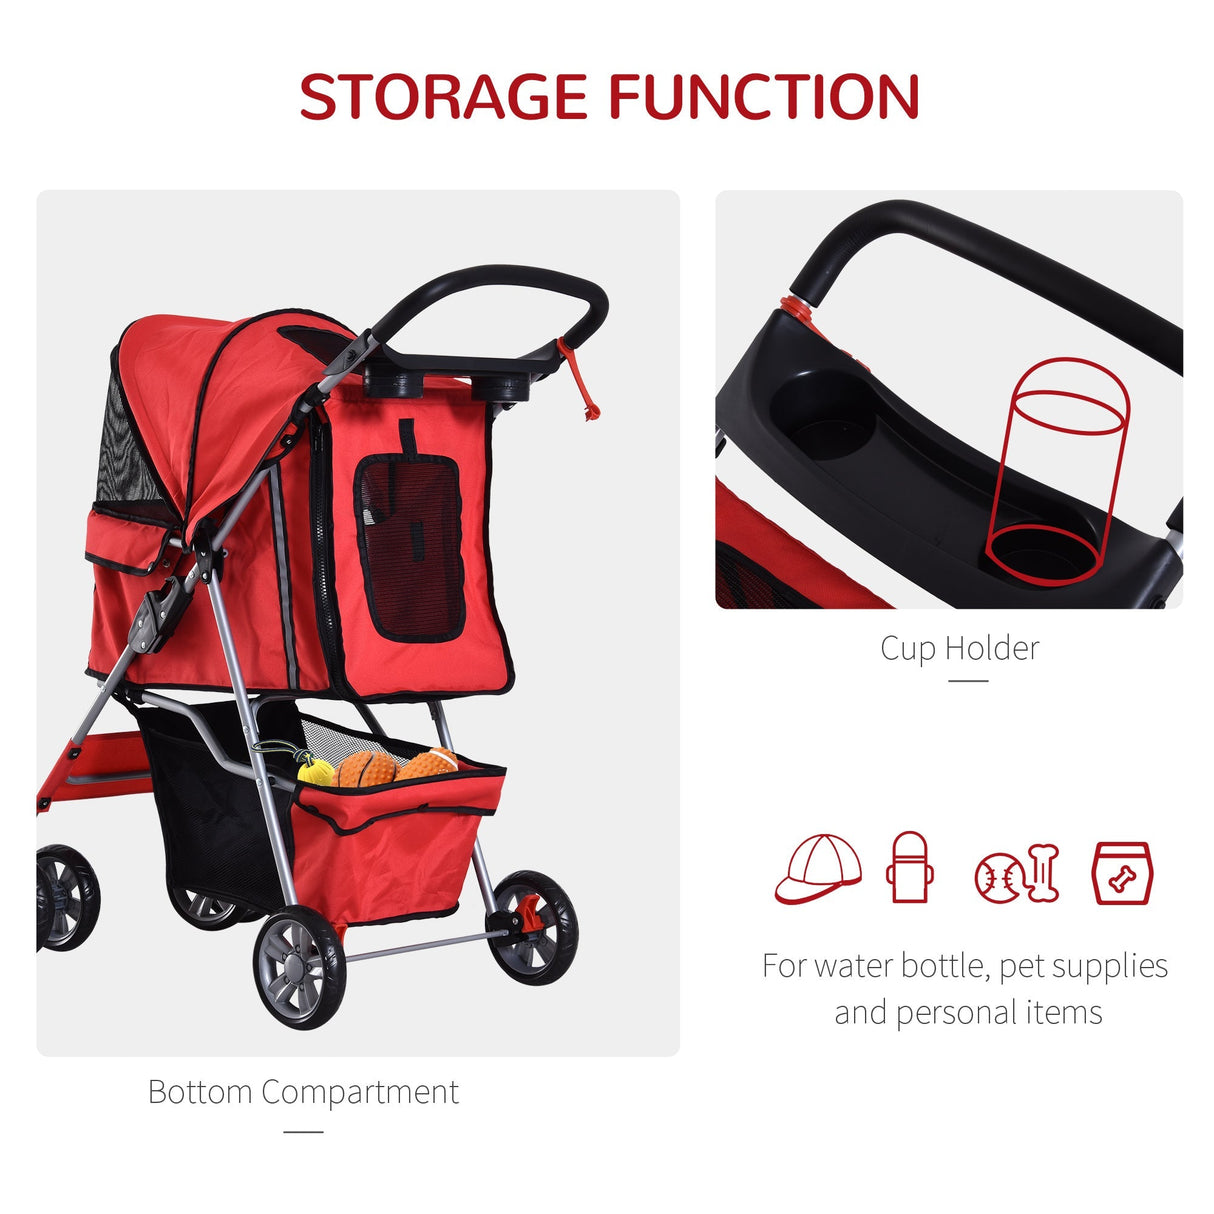 Dog Pushchair for Small Miniature Dogs Cats Foldable Travel Carriage with Wheels Zipper Entry Cup Holder Storage Basket, PawHut, Red